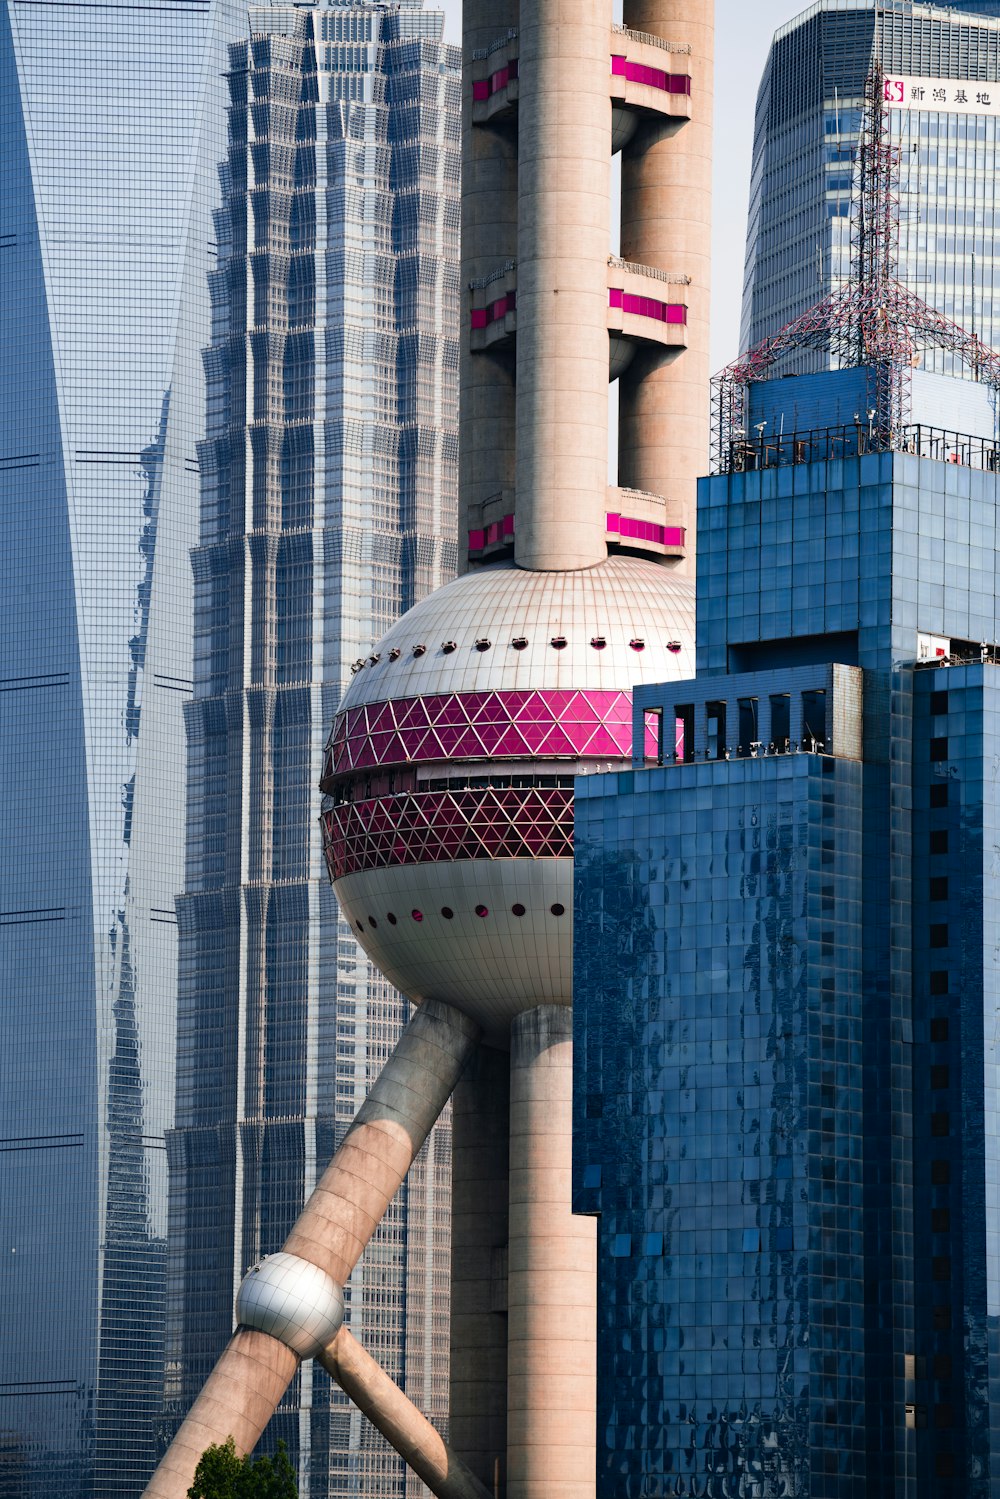 a tall building with a pink dome on top of it